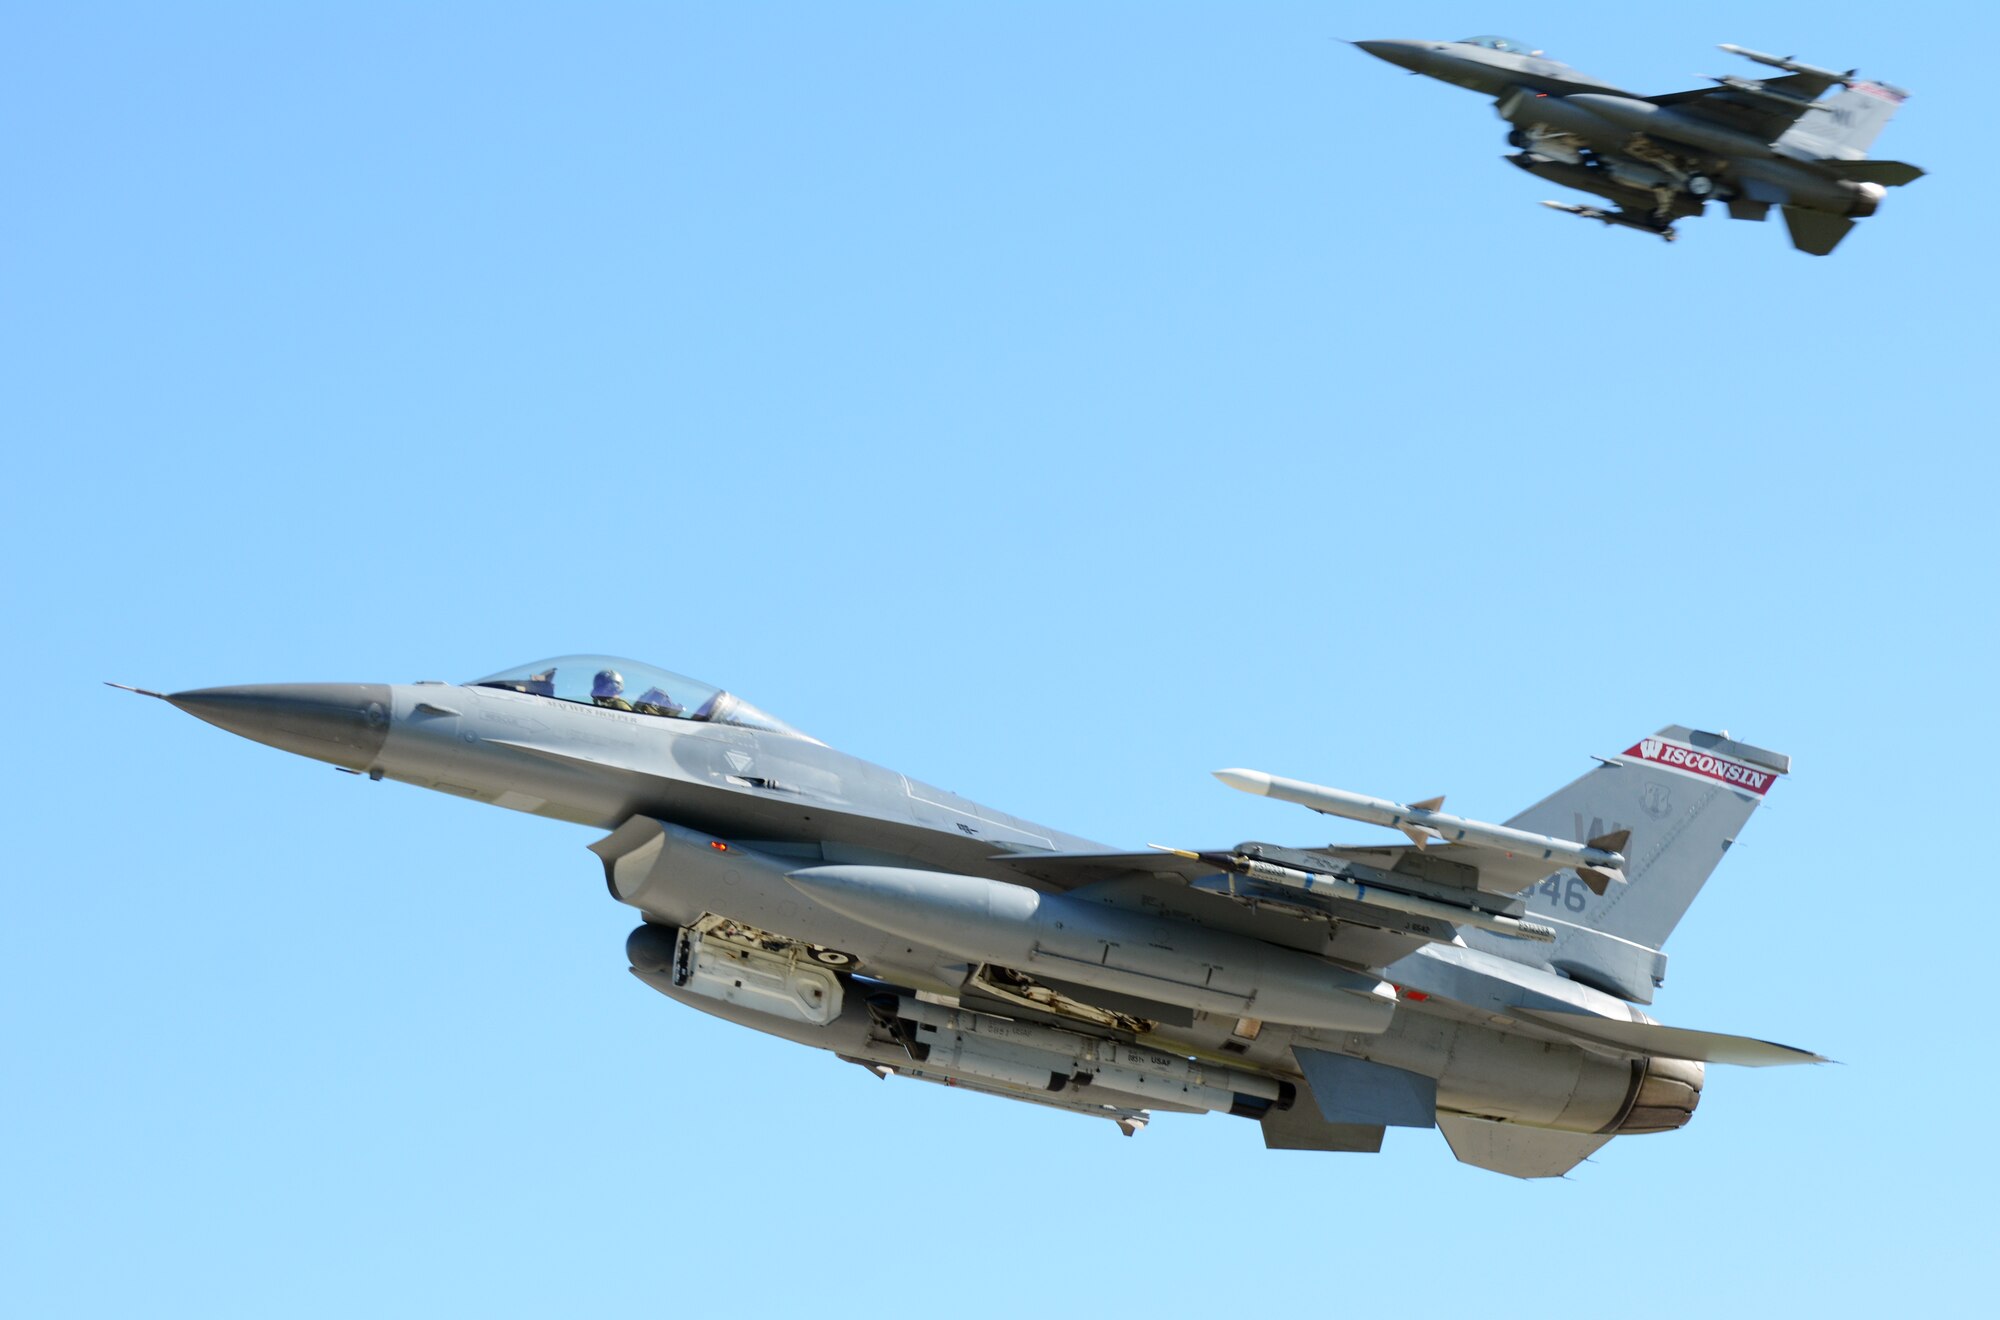 Two F-16 Fighting Falcons from the 115th Fighter Wing in Madison, Wis., perform flyover maneuvers prior to landing on the runway at Volk Field Air National Guard Base, Wis., July 16, 2014. The jets were moved to Volk Field for the month of July, while the Dane County Regional Airport completed runway maintenance and repairs. (Air National Guard photo by Senior Airman Andrea F. Liechti)